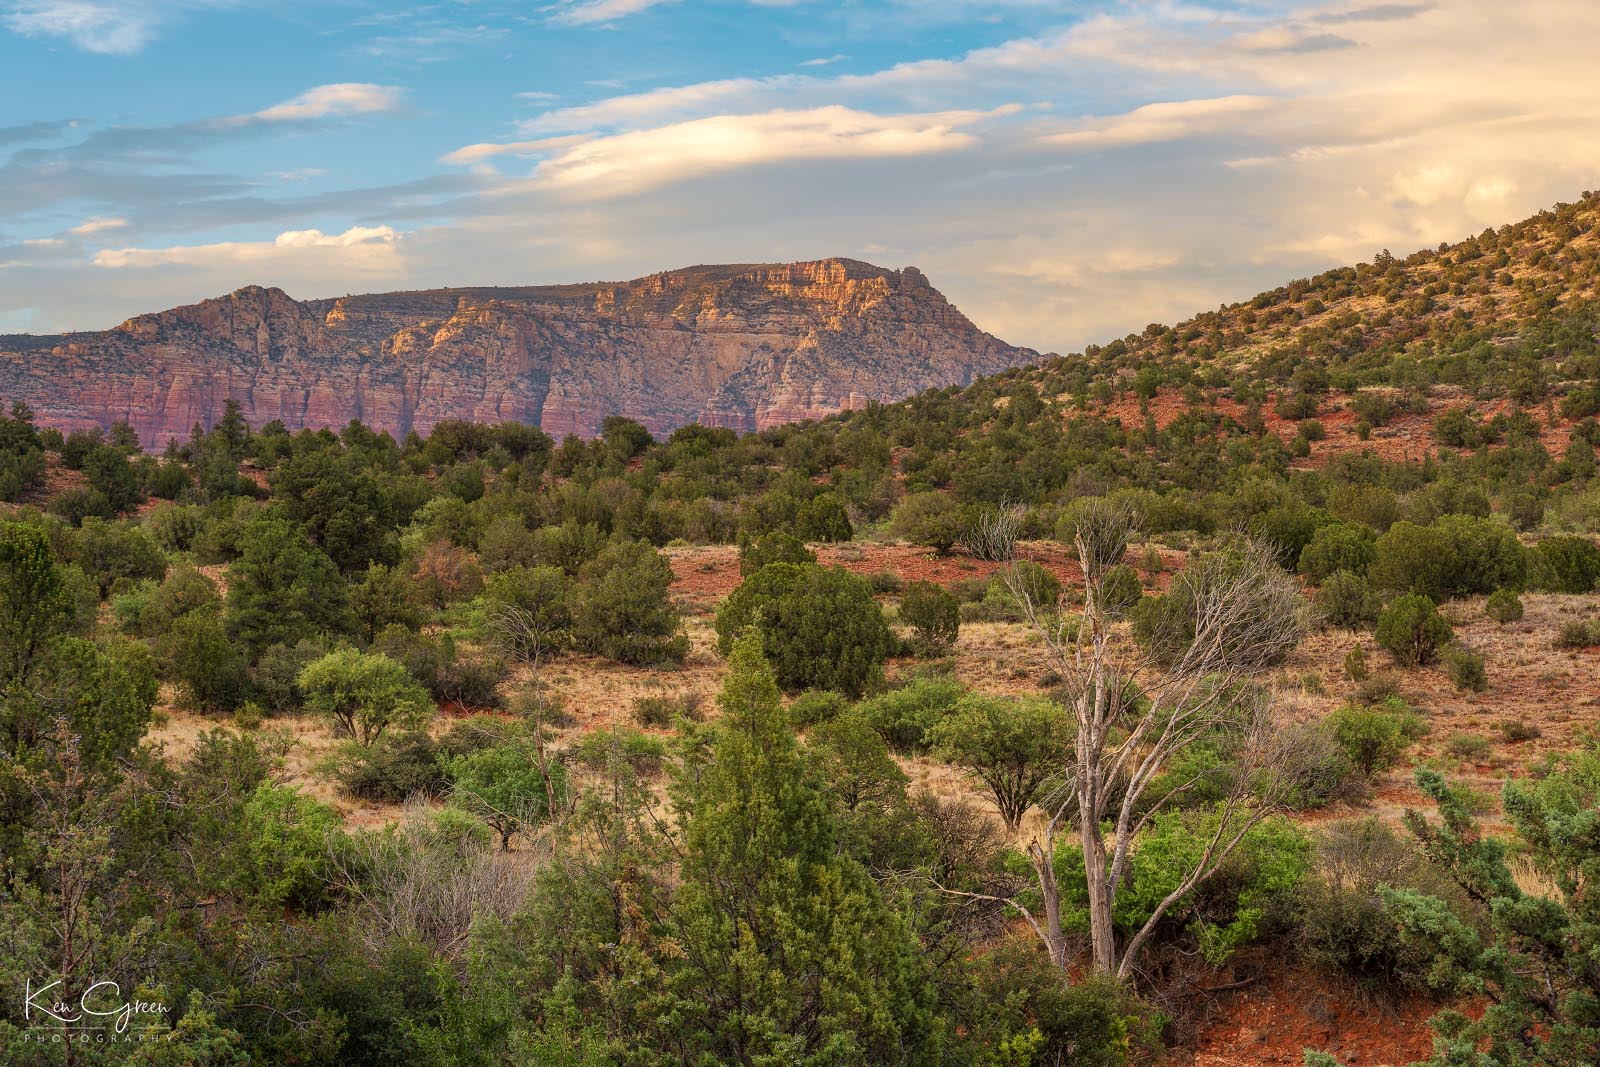 A canyon in Sedona, Arizona seen from Red Rock Scenic Byway.